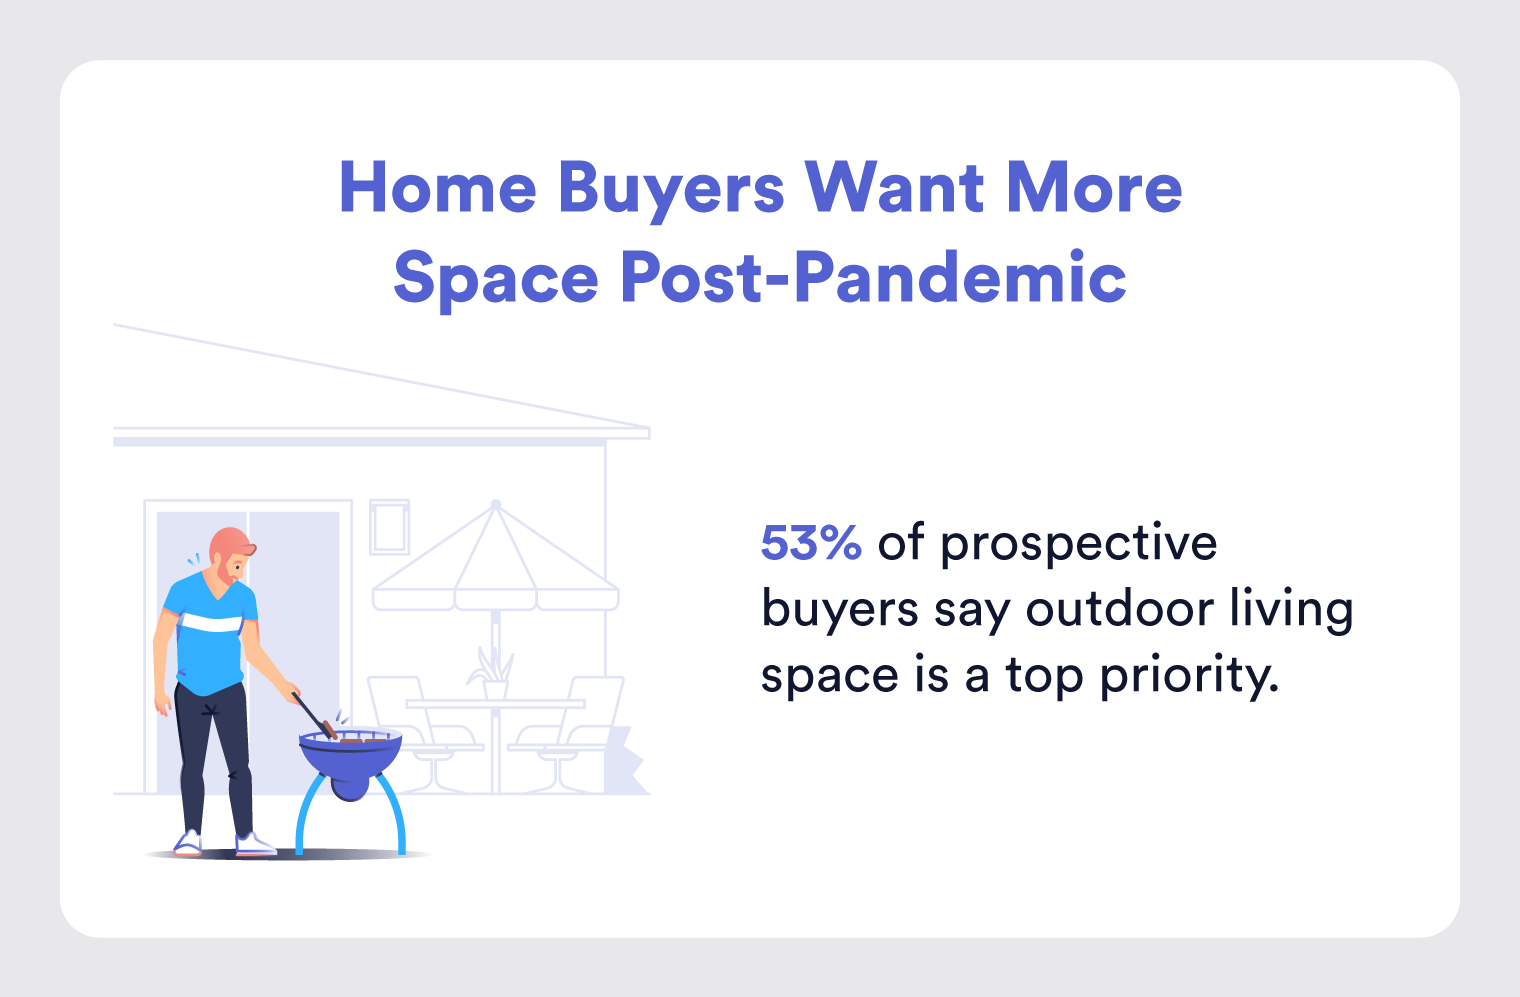 Graphic: 53% of home buyers say outdoor living space is a top priority when looking for a home